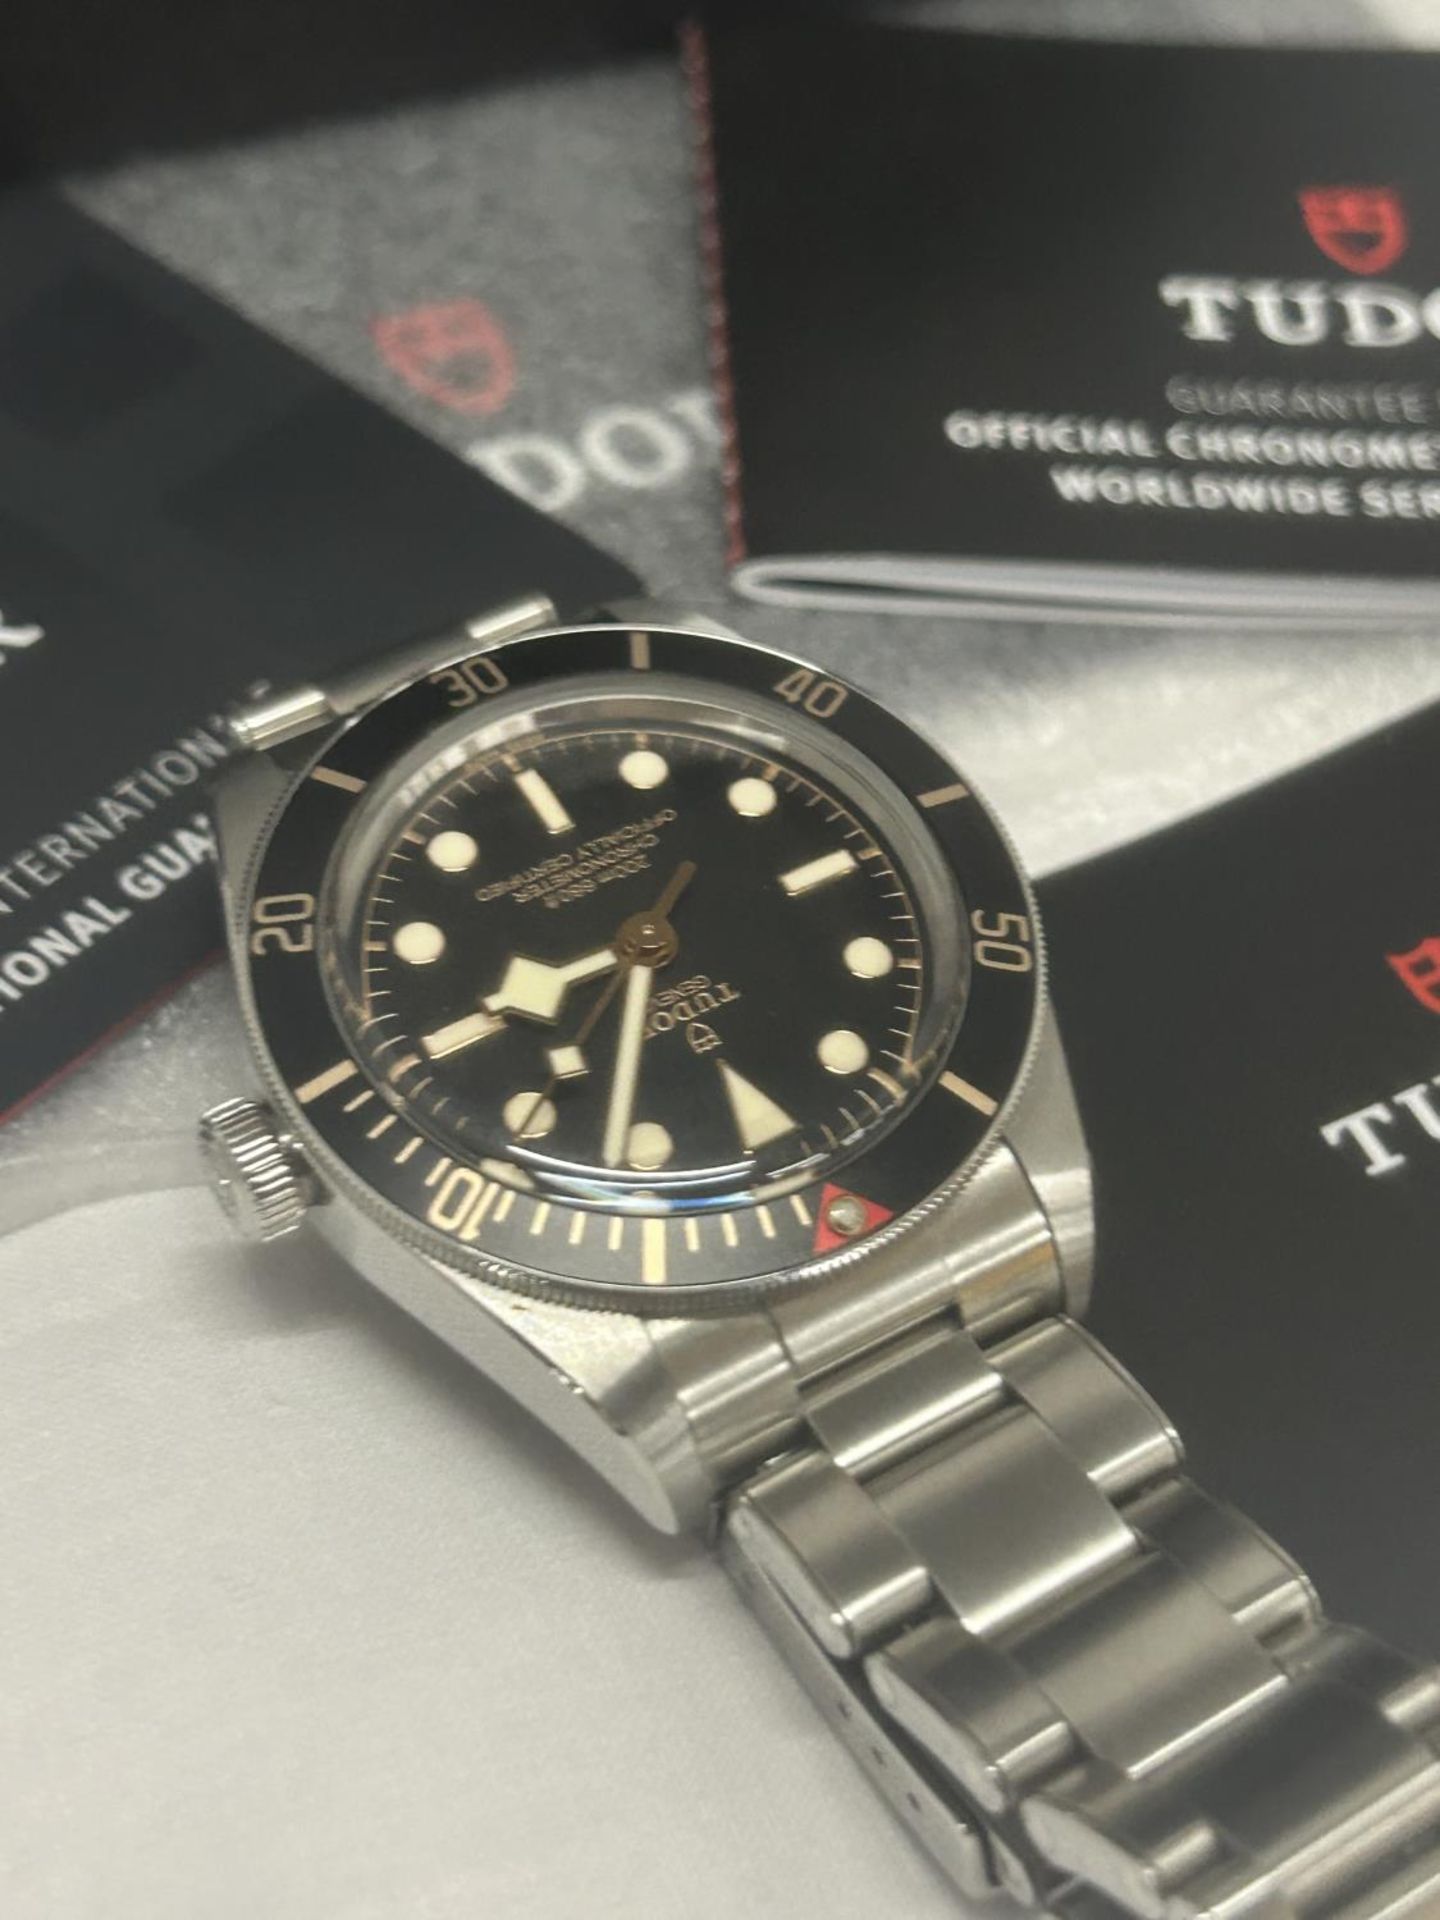 A TUDOR BLACK BAY 58 CHRONOGRAPH AUTOMATIC WATCH WITH 39MM BLACK DIAL, COMPLETE WITH ORIGINAL BOX - Bild 6 aus 7